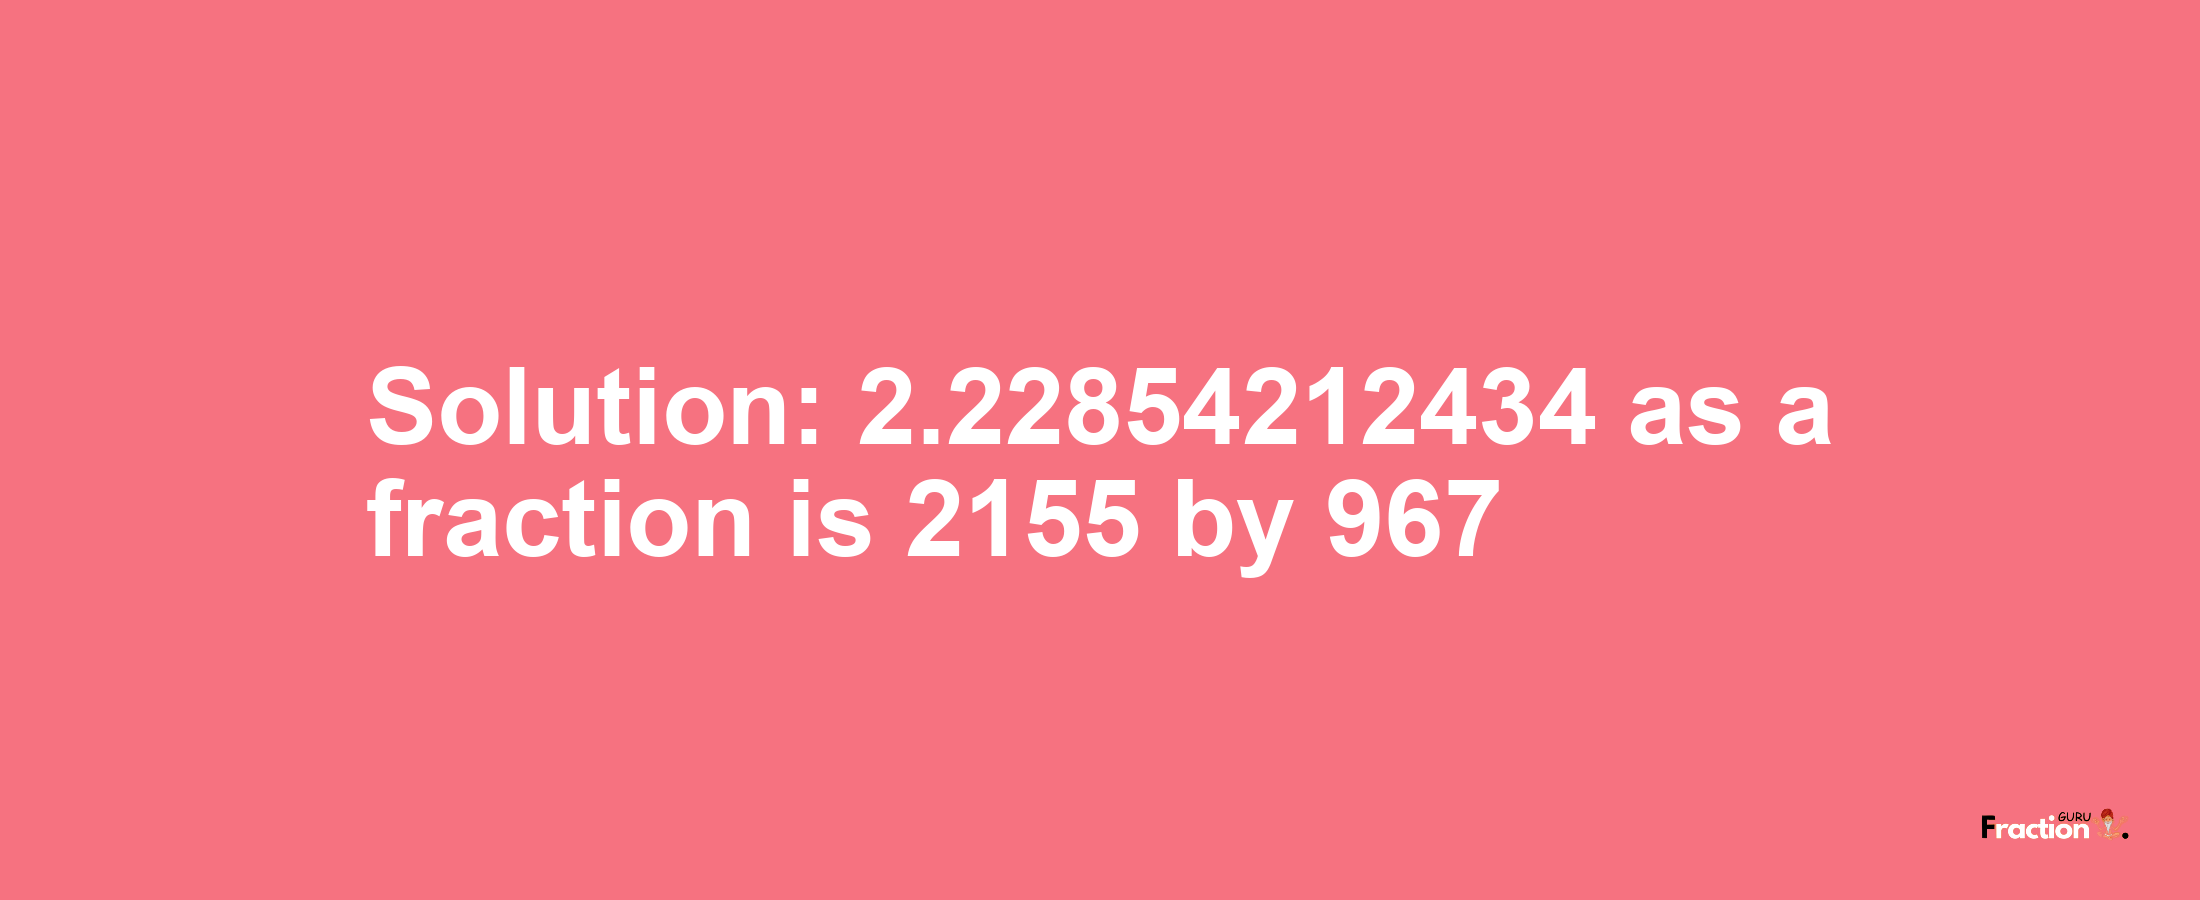 Solution:2.22854212434 as a fraction is 2155/967